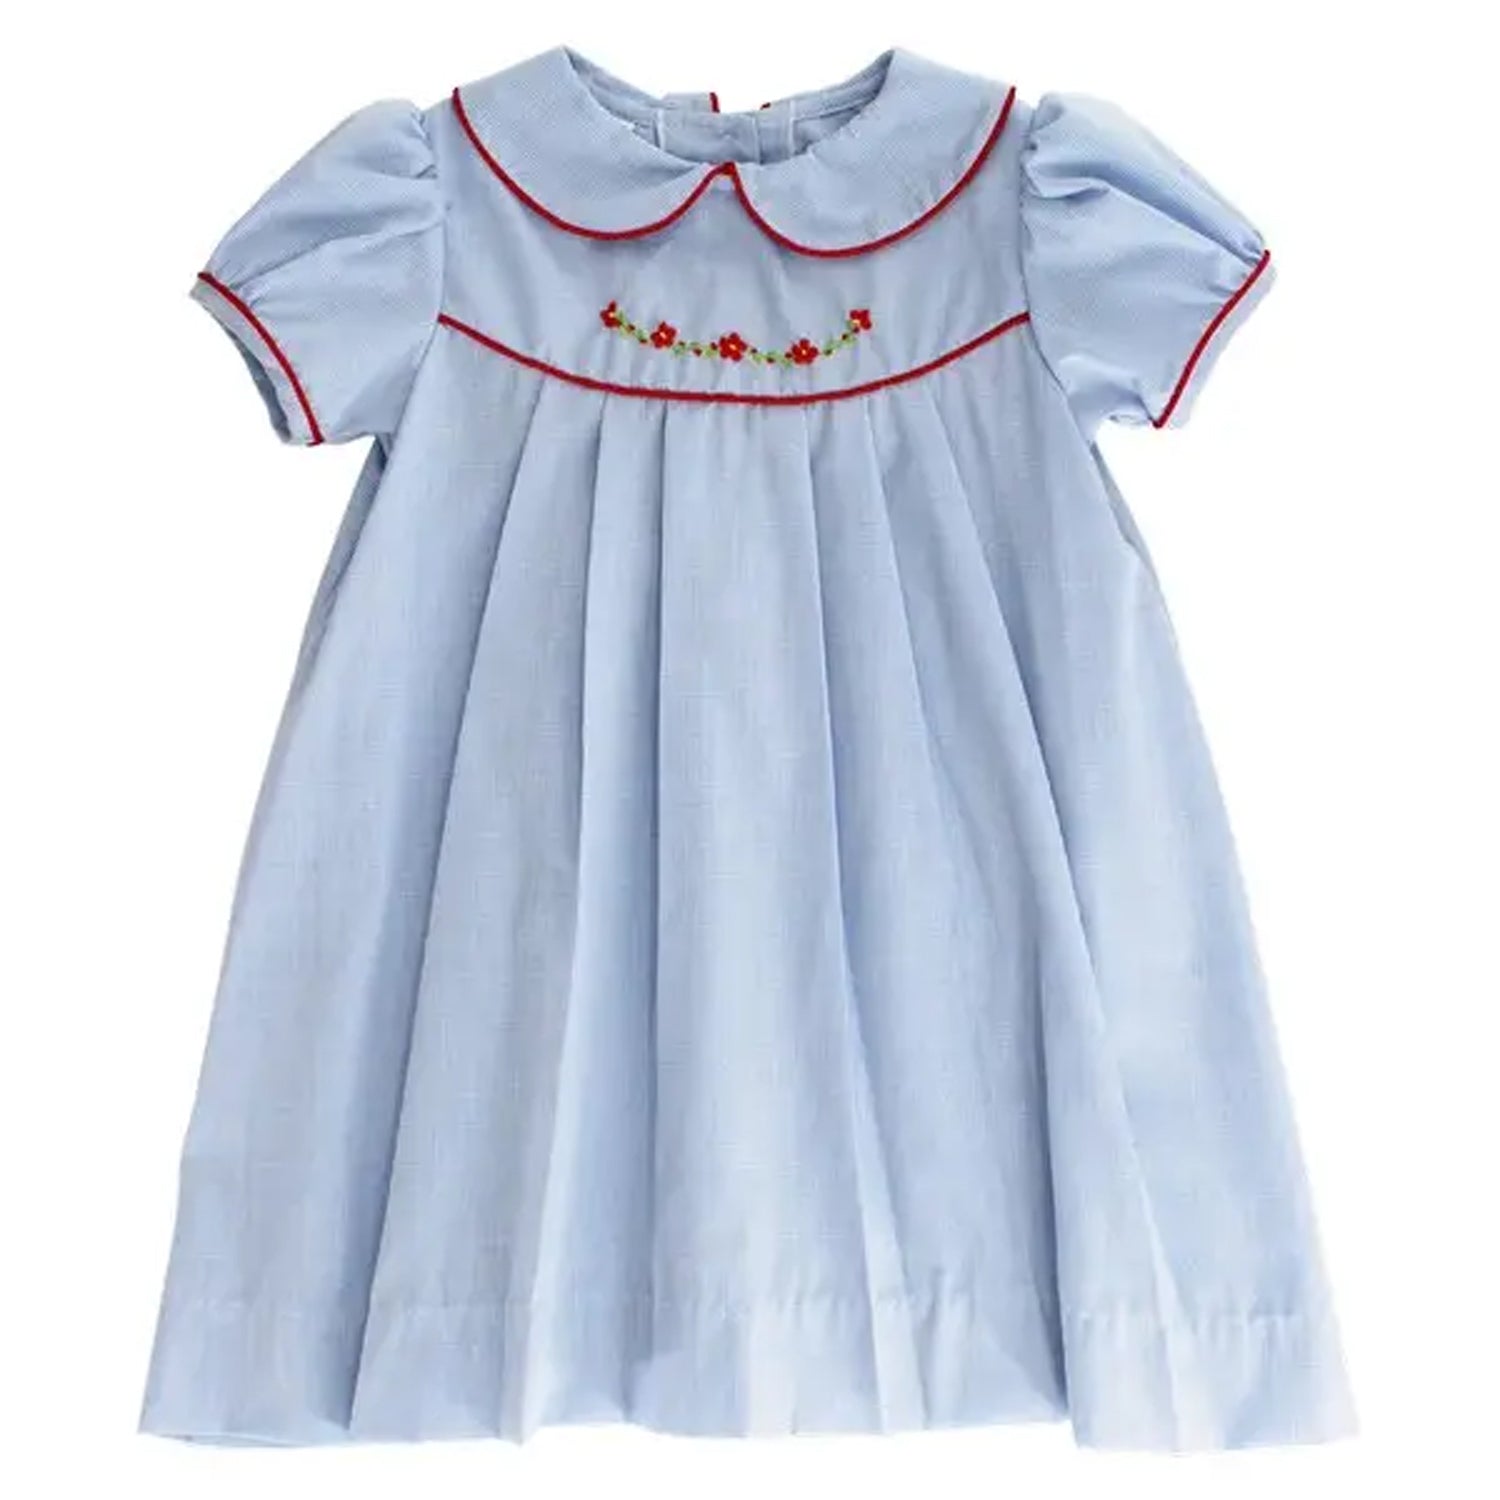 Blue Microcheck With Red Embroidery Dress